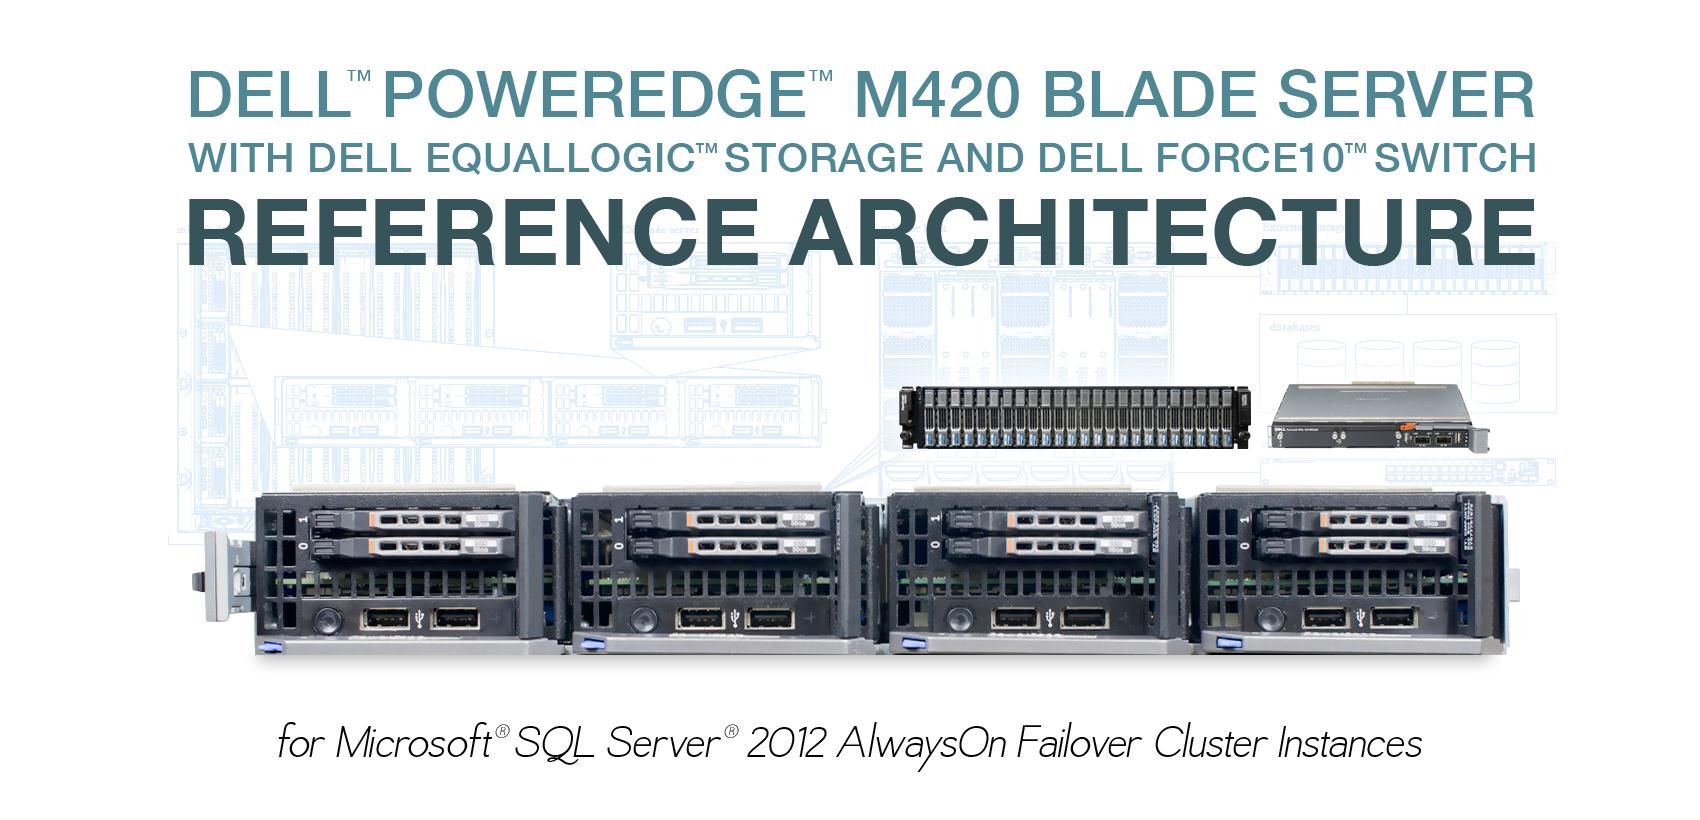 DELL POWEREDGE M420: A MICROSOFT SQL SERVER 2012 ALWAYSON FAILOVER CLUSTER REFERENCE